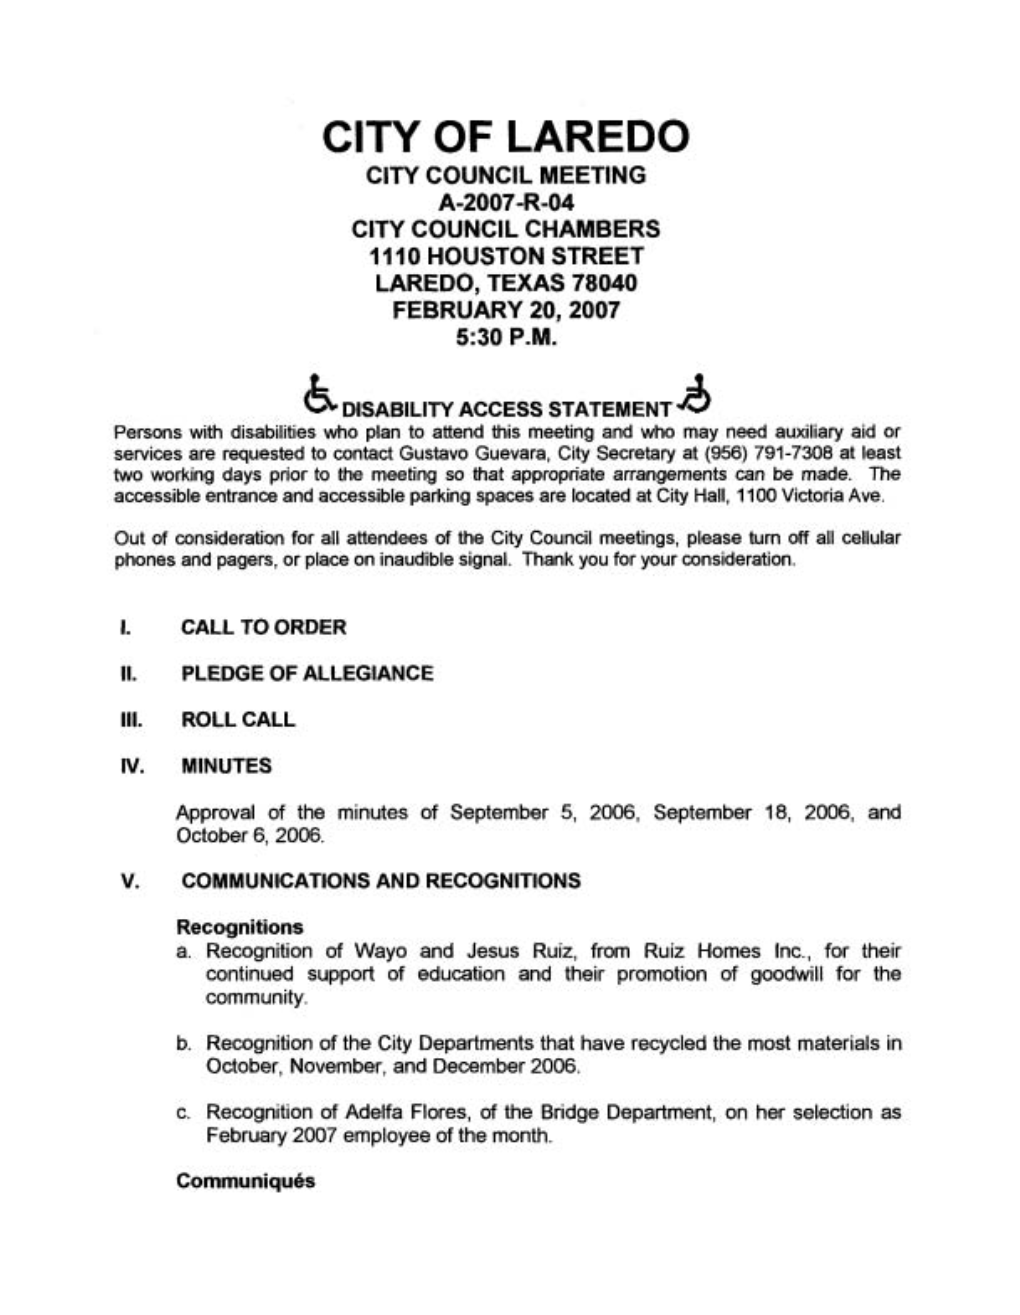 City Council Meetings, Please Turn Off All Cellular Phones and Pagers, Or Place on Inaudible Signal